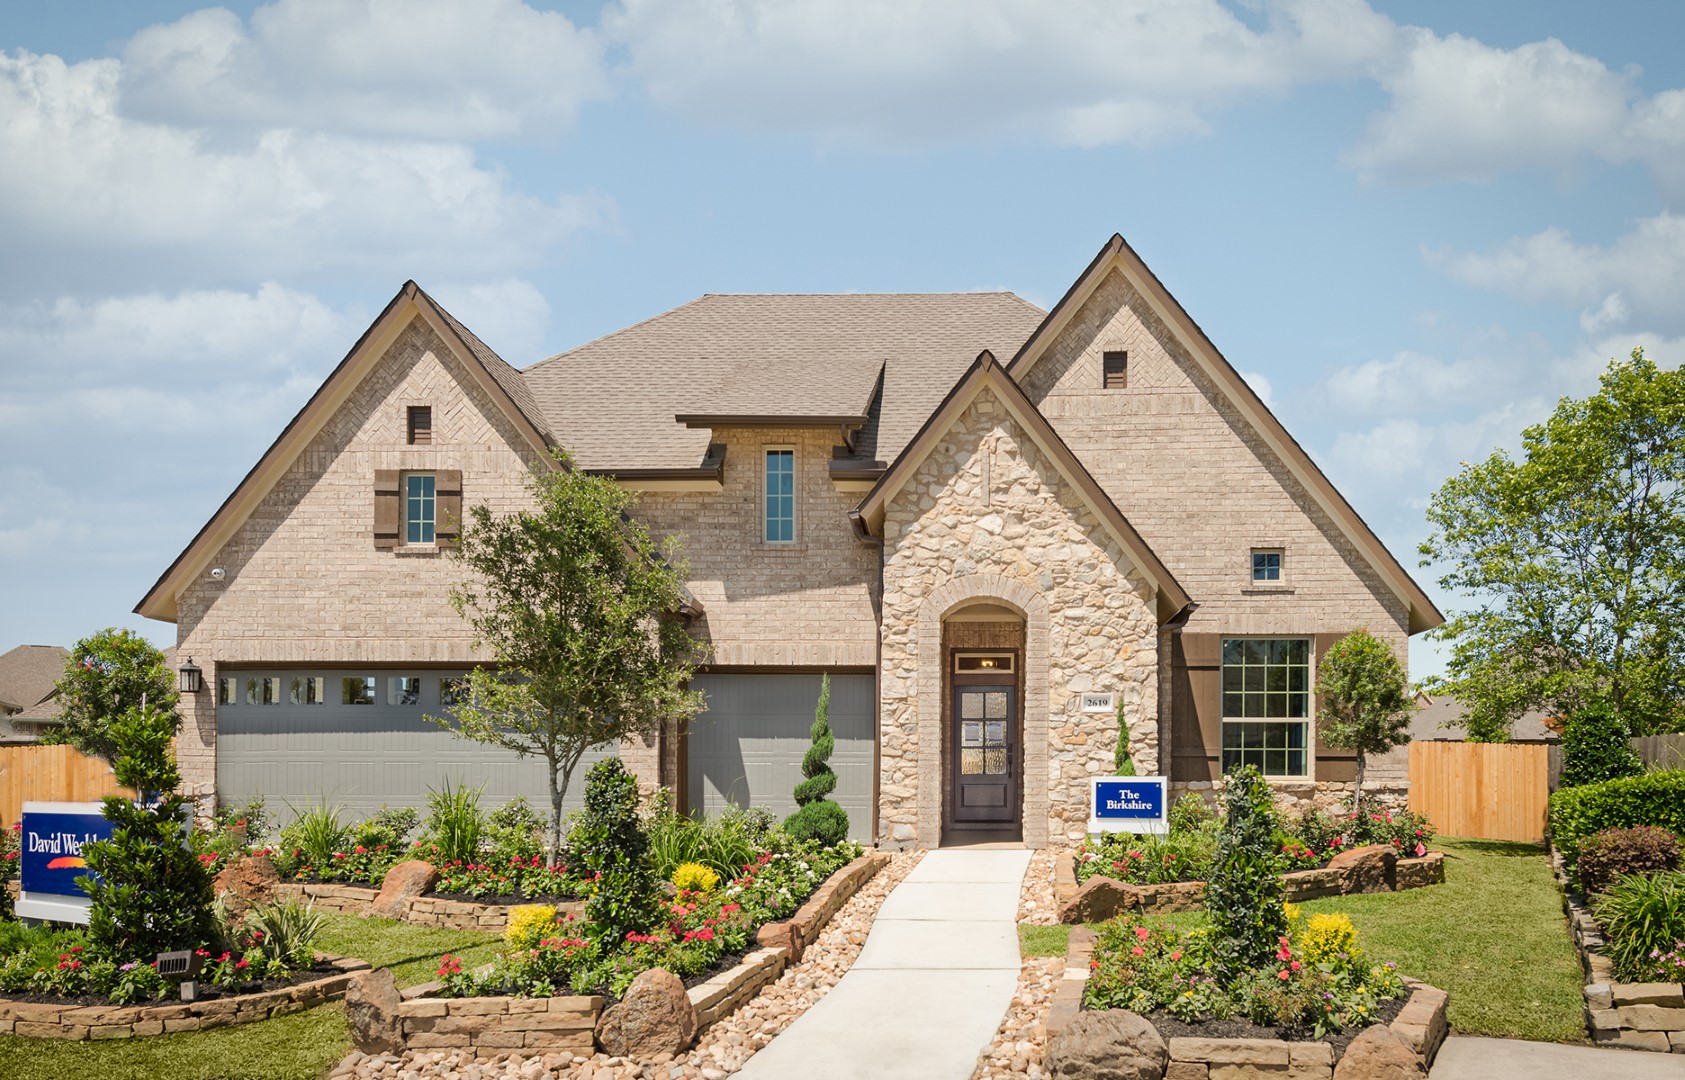 David Weekley Homes And Perry Homes Debut New Collections Of Homes On 60-Foot Homesites In The Woodlands Hills